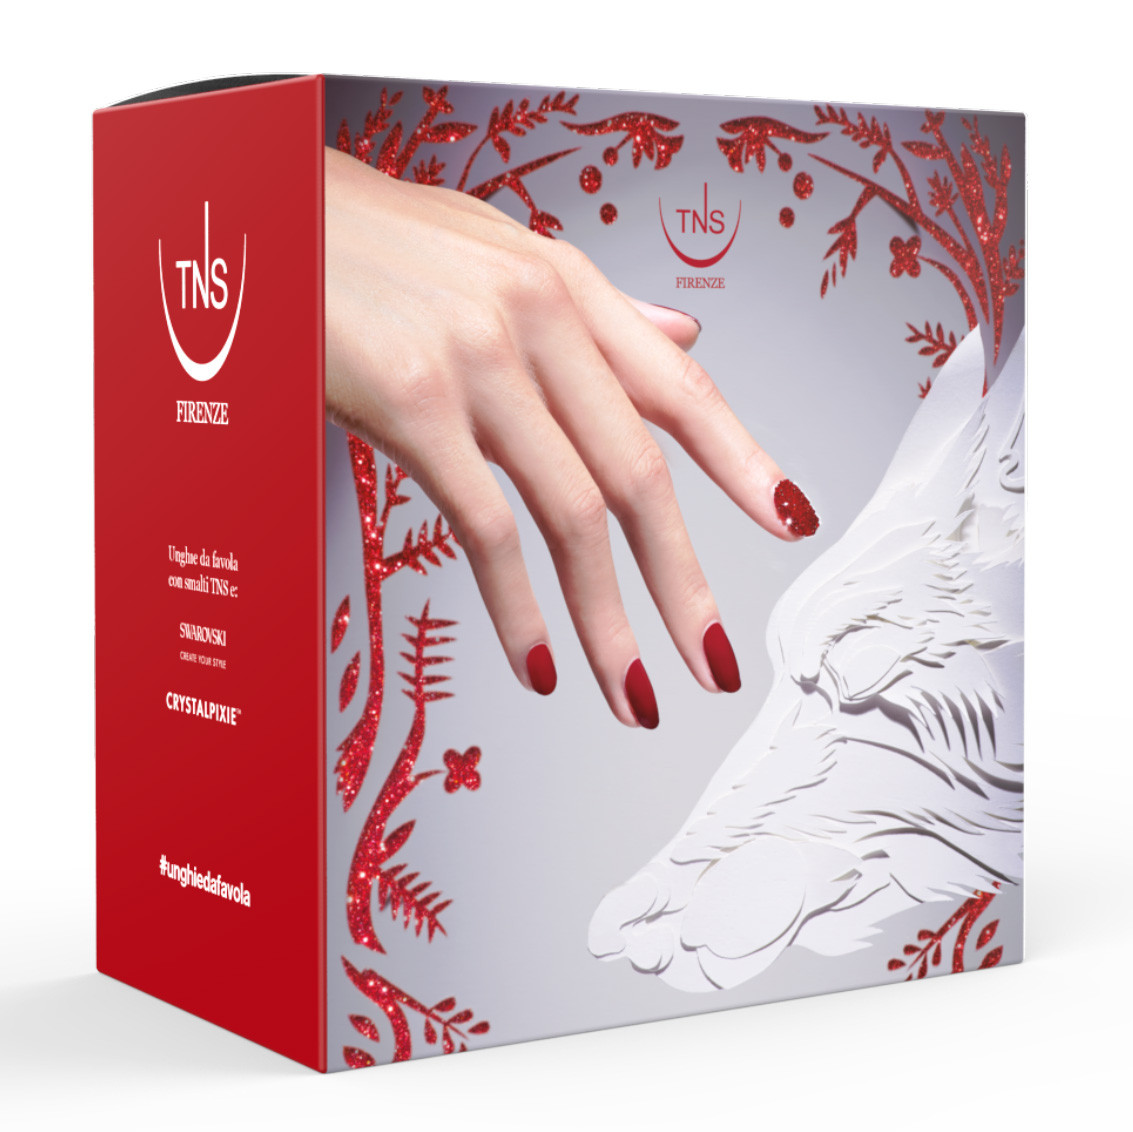 Coffret Nail Art Jewels Swarovski® Crystalpixie Red Touch avec vernis ongles